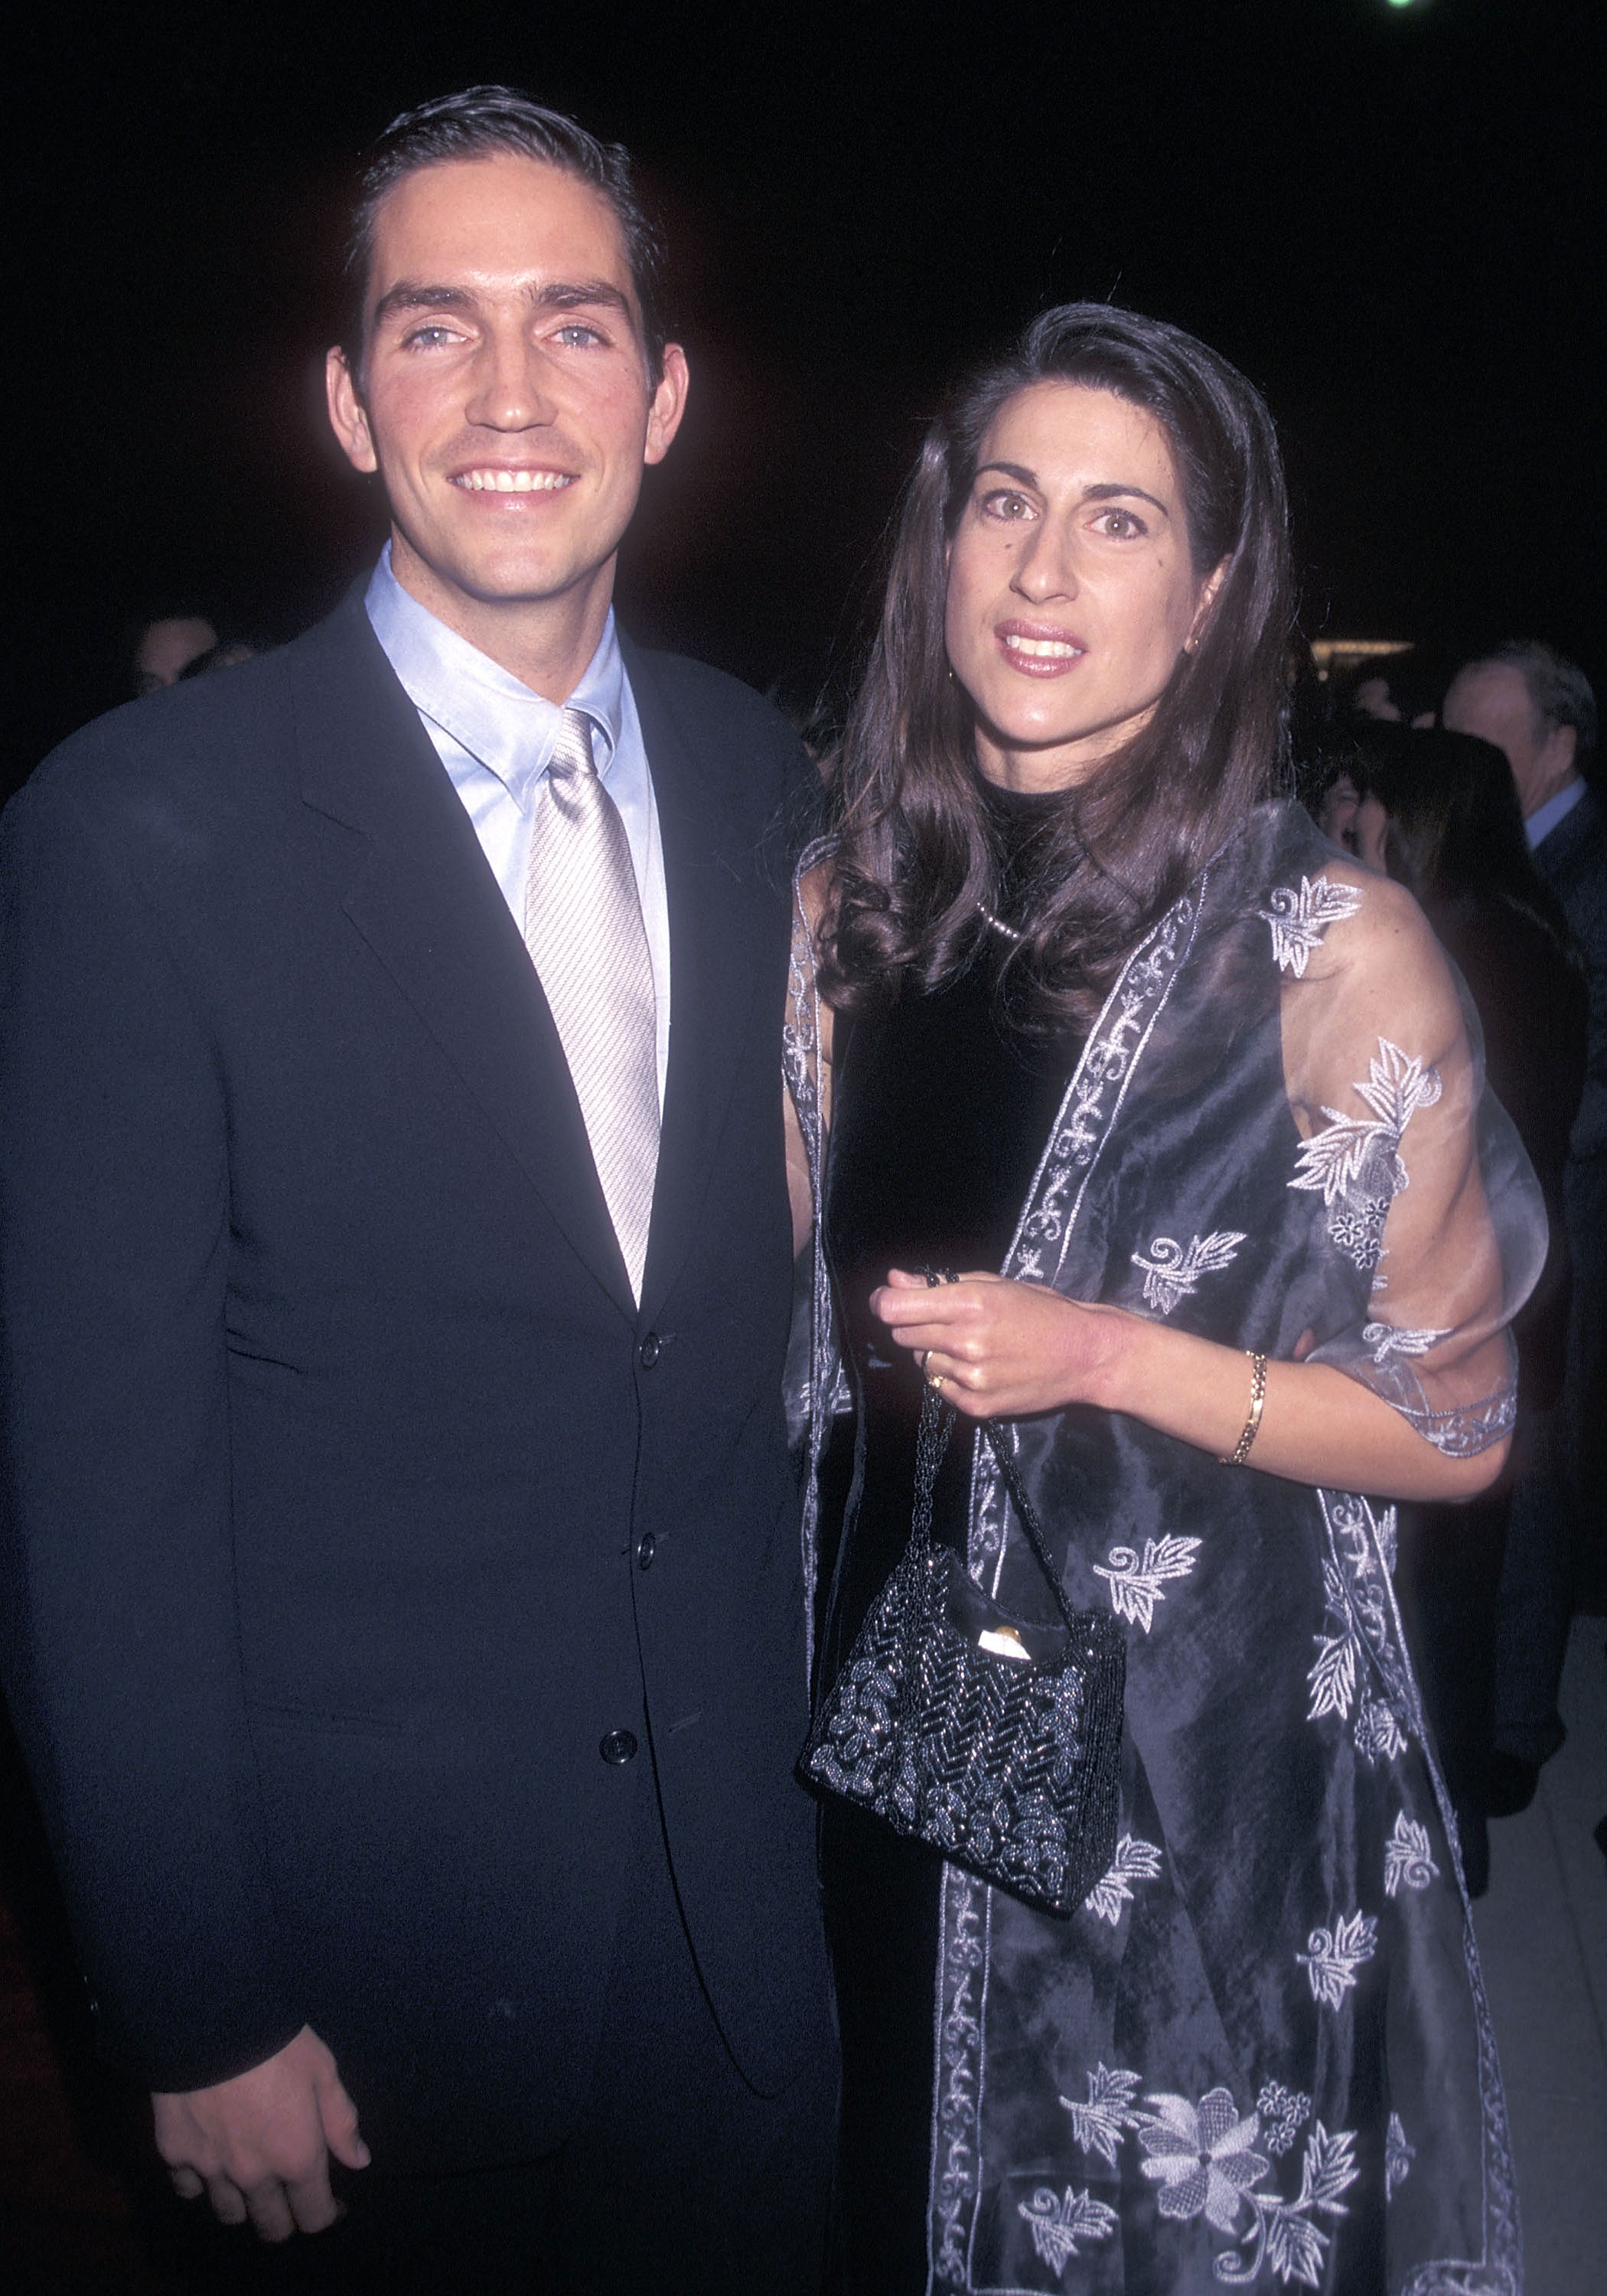 Jim Caviezel and Kerri Browitt at the "The Thin Red Line" premiere on December 22, 1998, in California. | Source: Getty Images